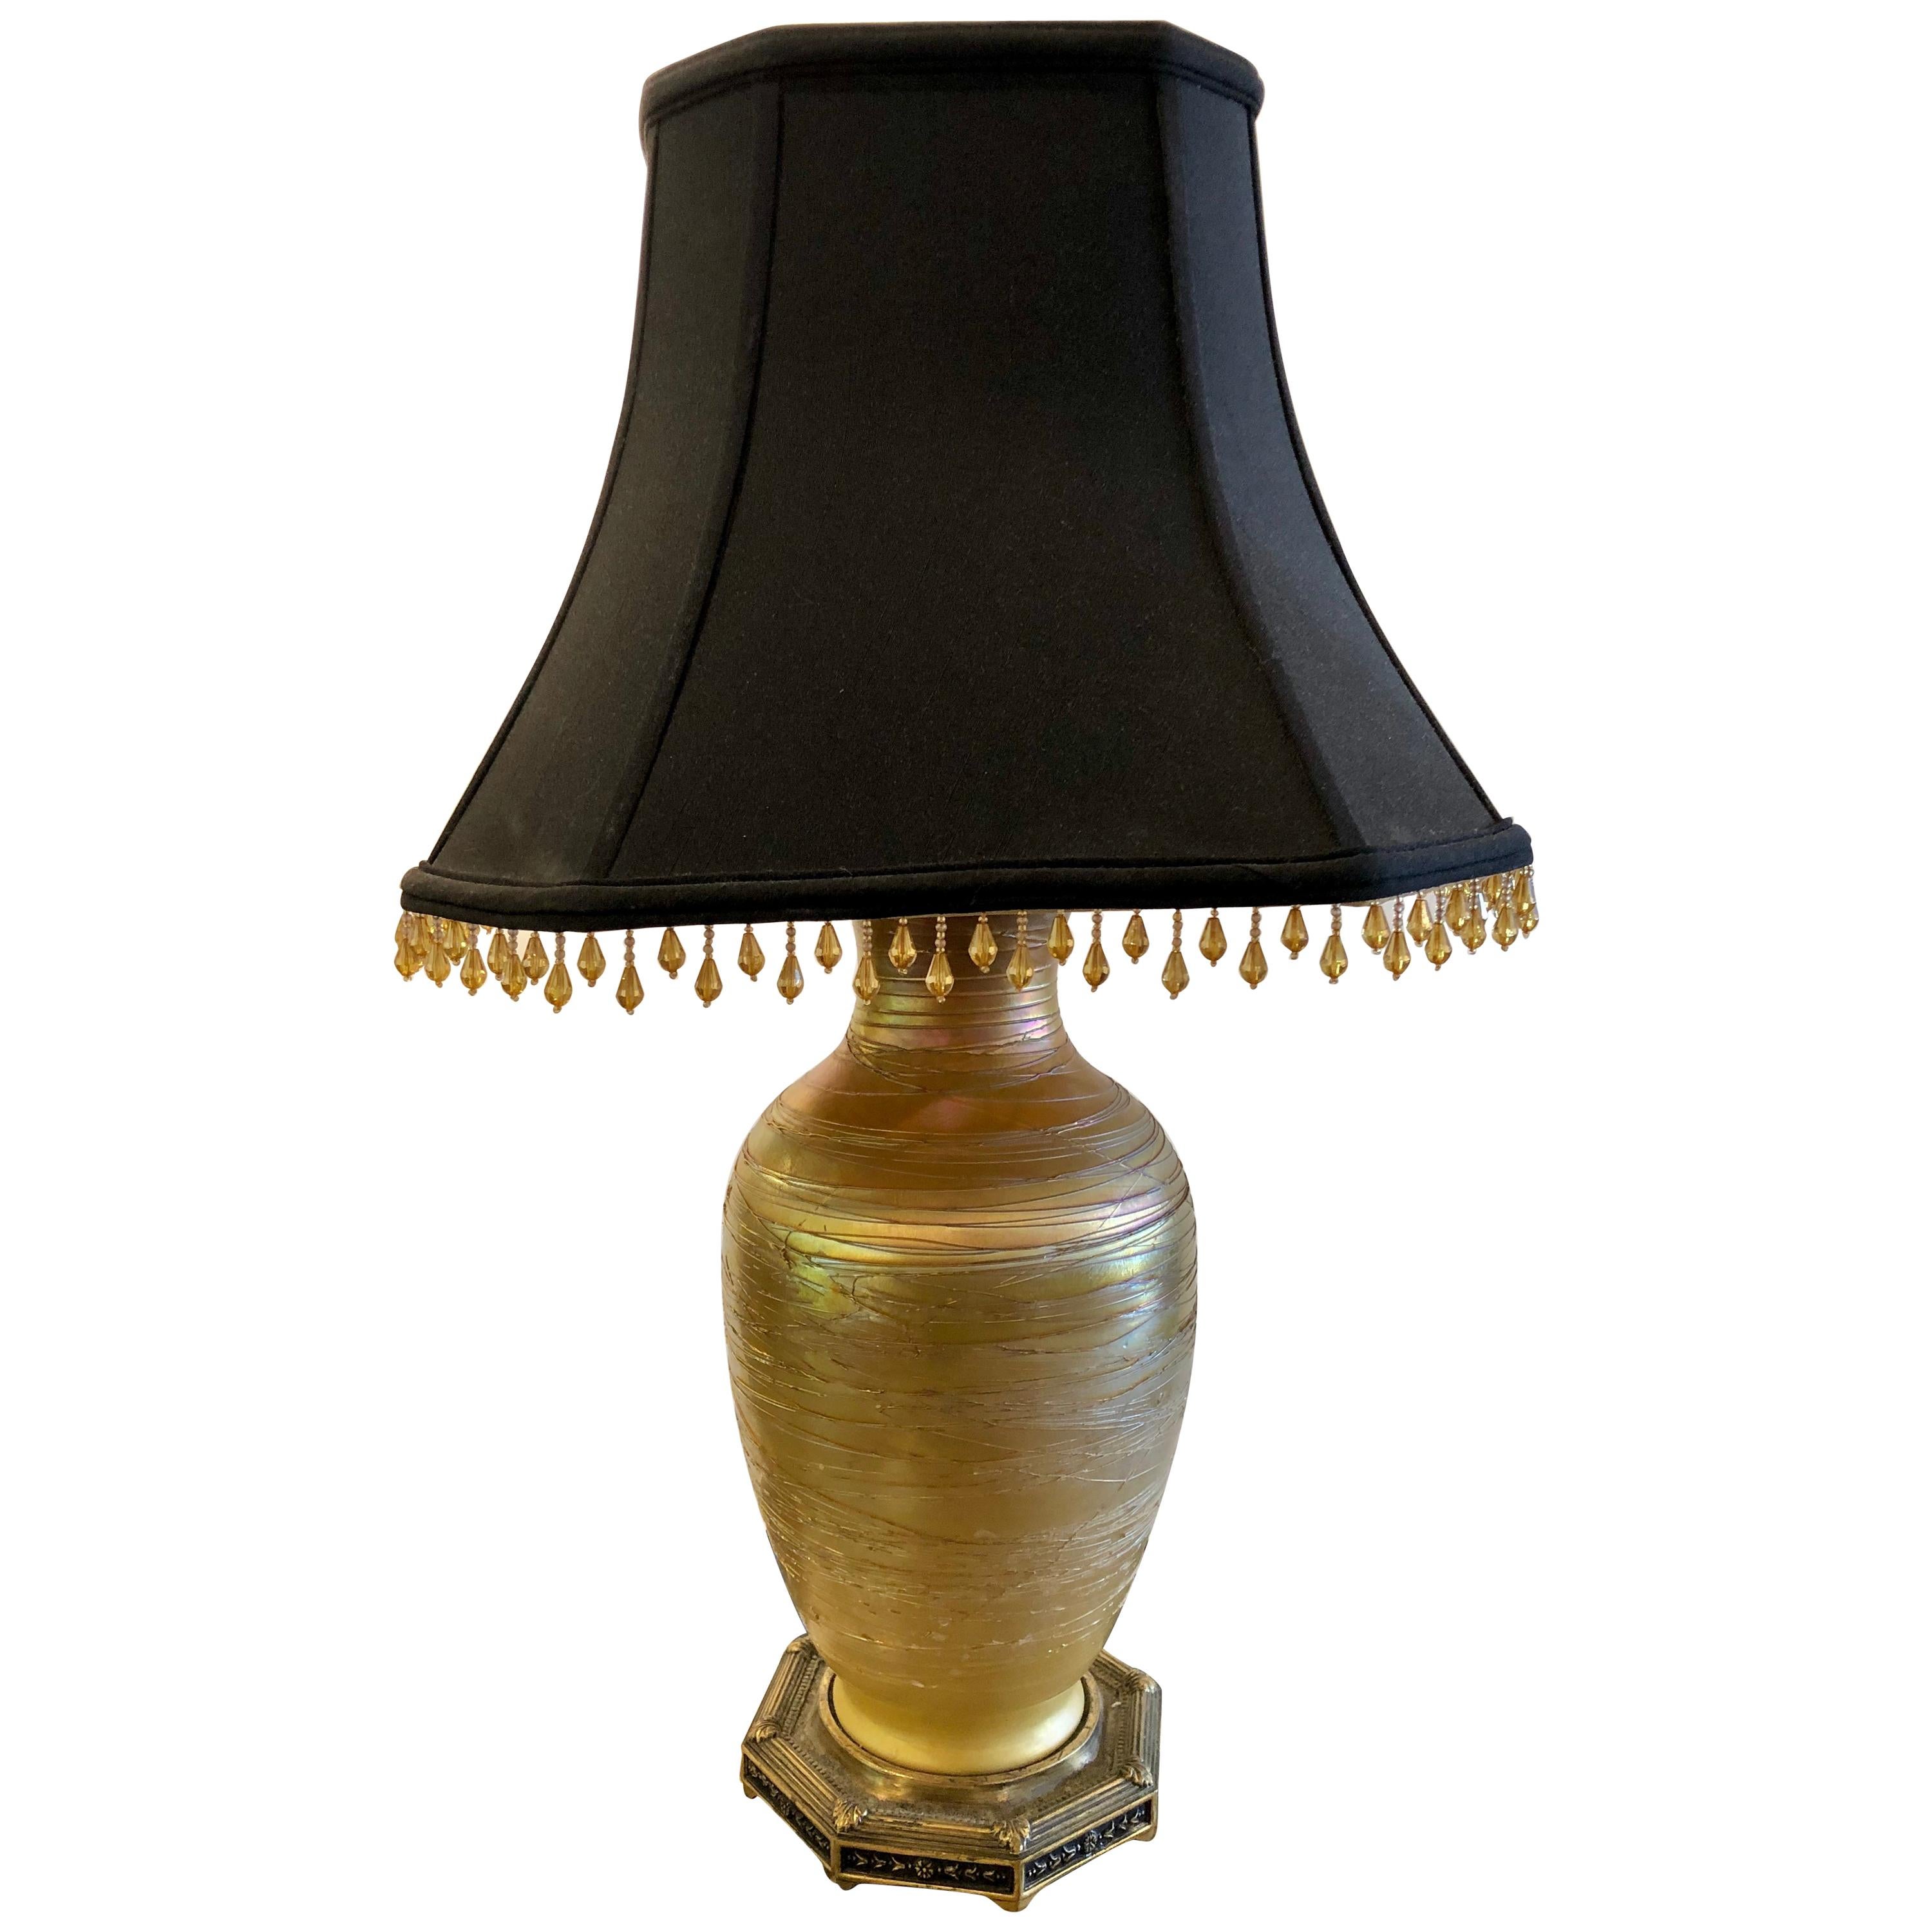 Art Deco Style Durand Fashion Art Glass Table Lamp with Custom Shade